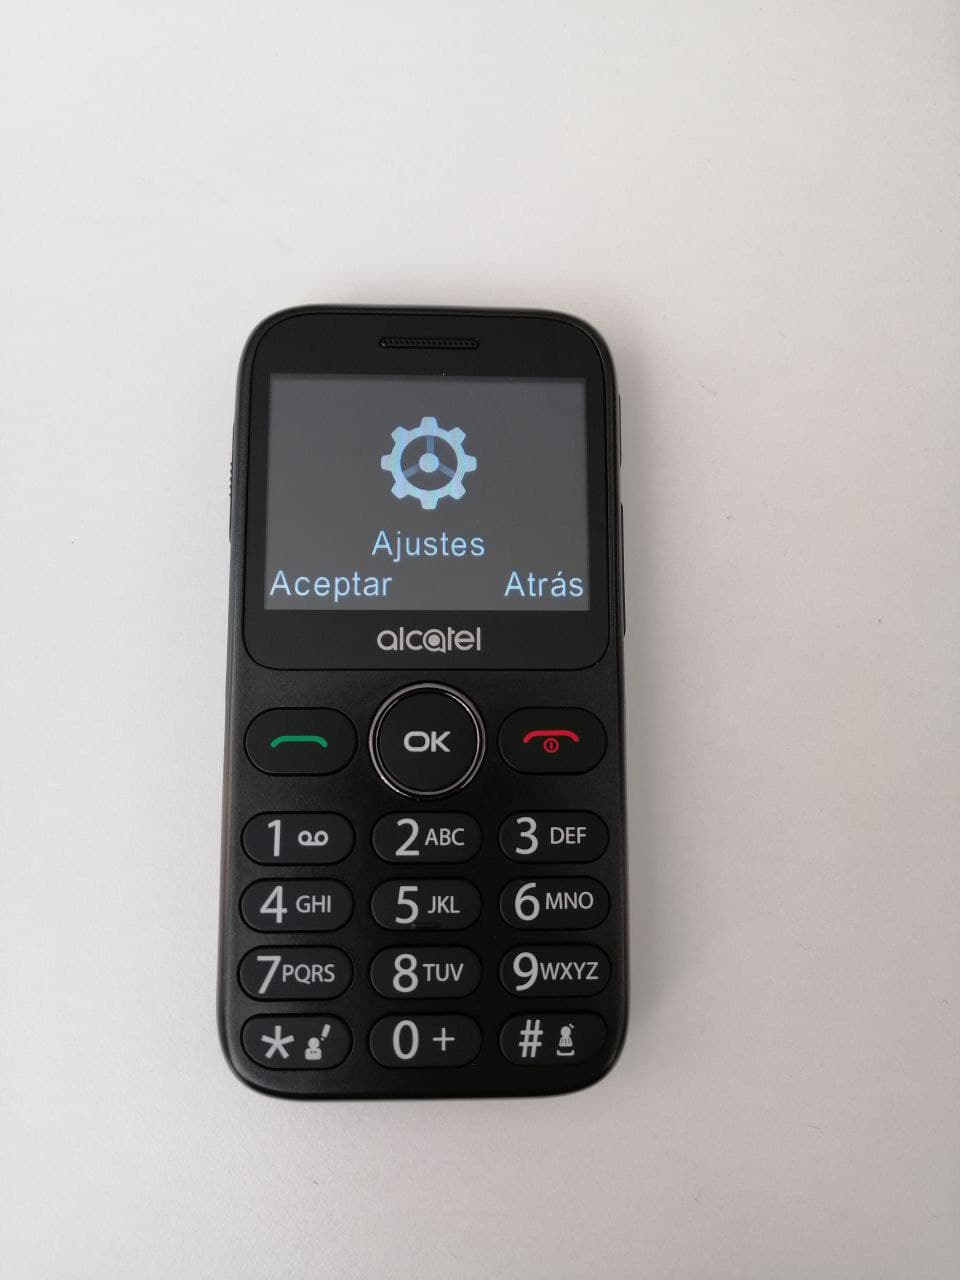 Image showing the front of the phone with the screen in settings mode